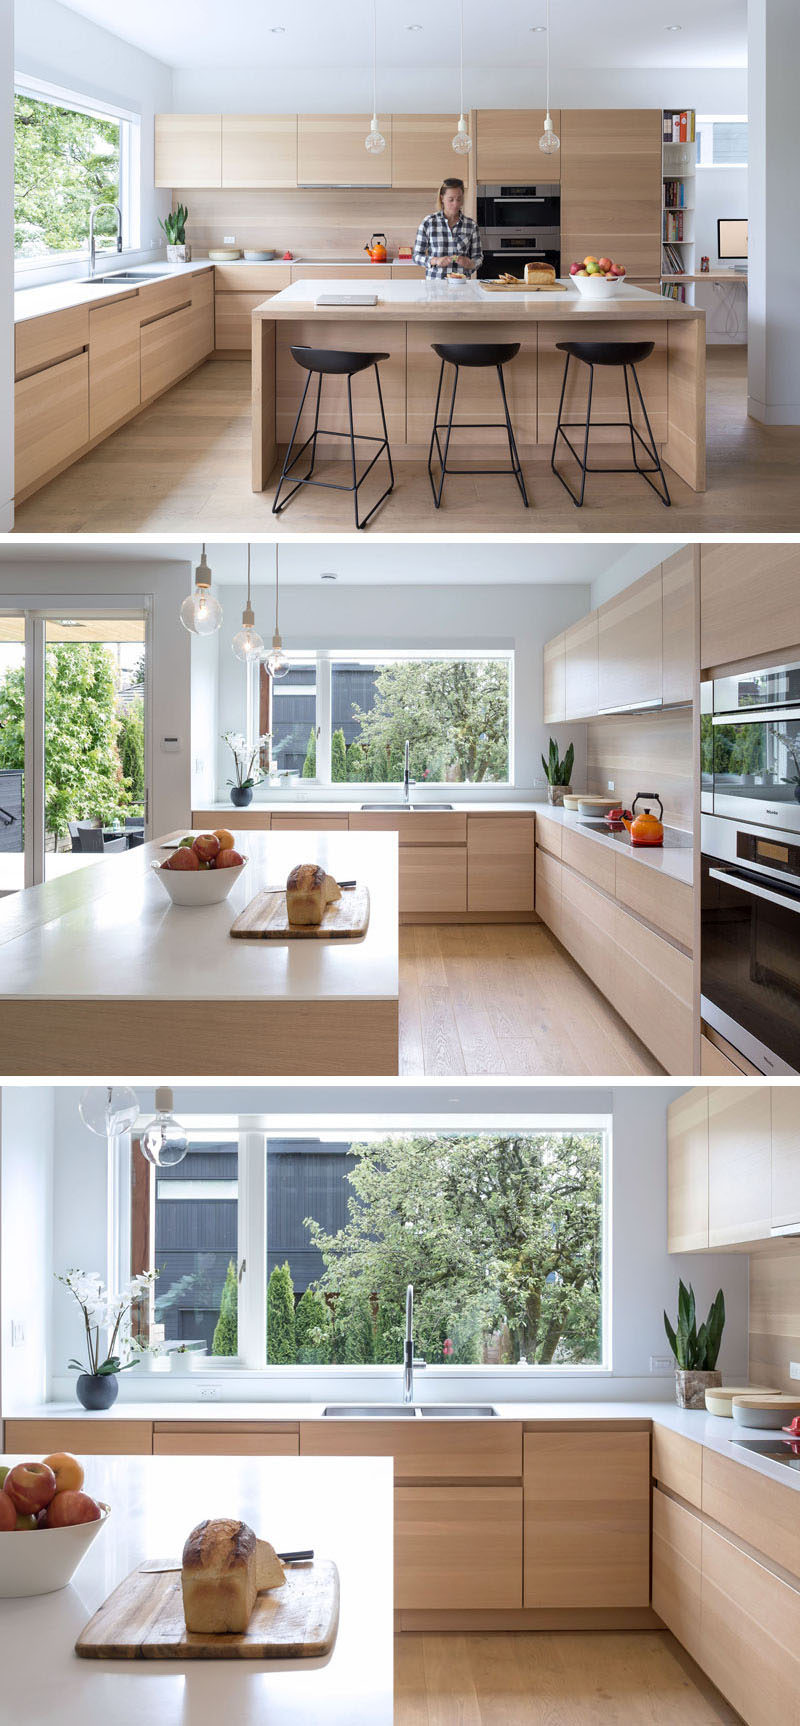 In this kitchen, a large window provides lots of natural light to the mostly wooden kitchen. Exposed shelves are used to store recipe books, and the kitchen has achieved a contemporary look by not including hardware on the cabinets. 